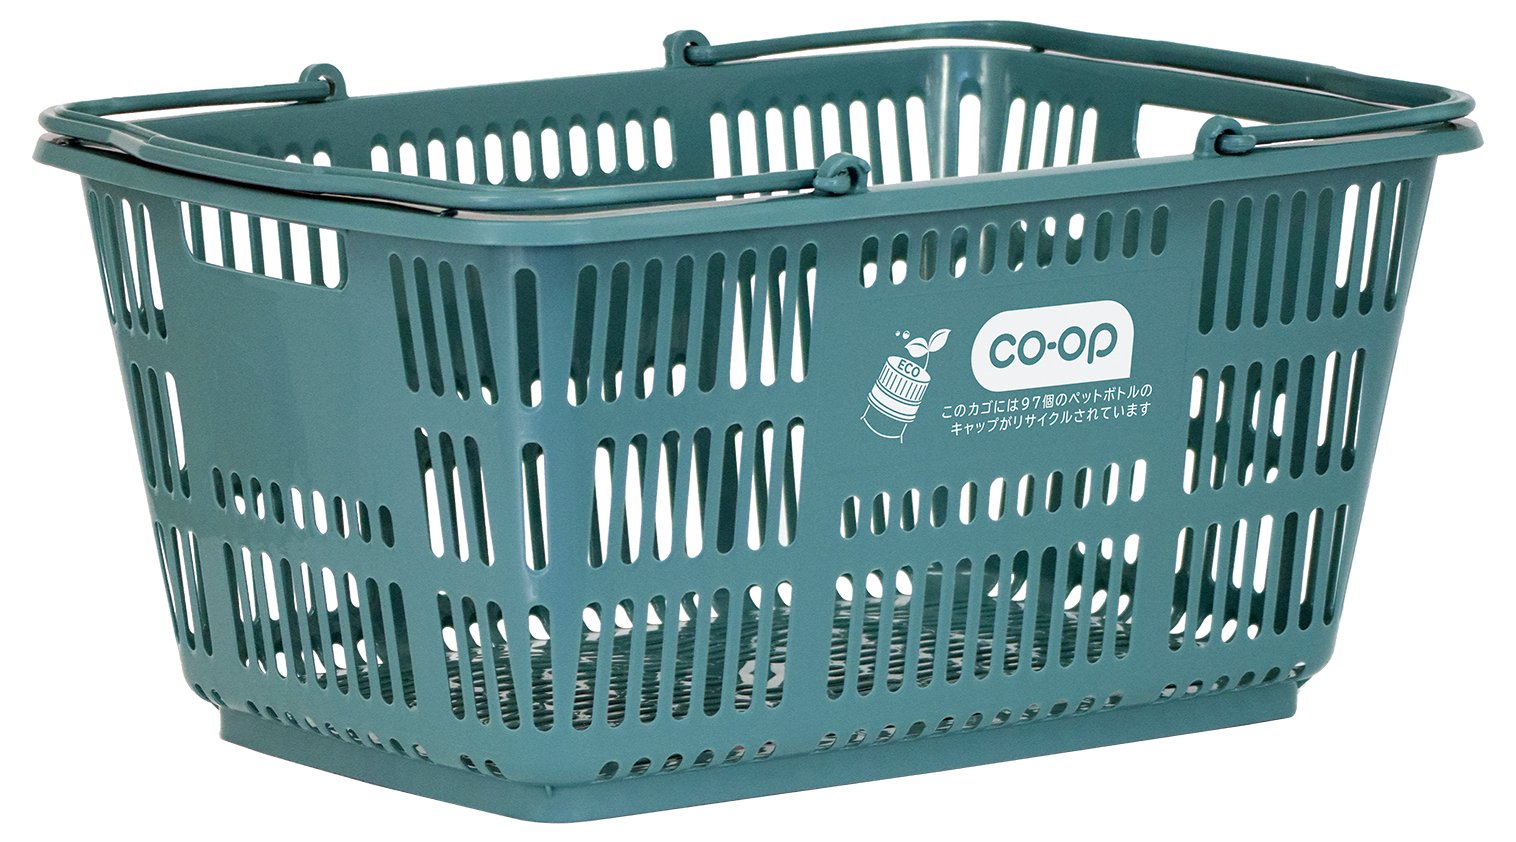 Co-opdeli introduces shopping baskets made from reused PET bottle caps